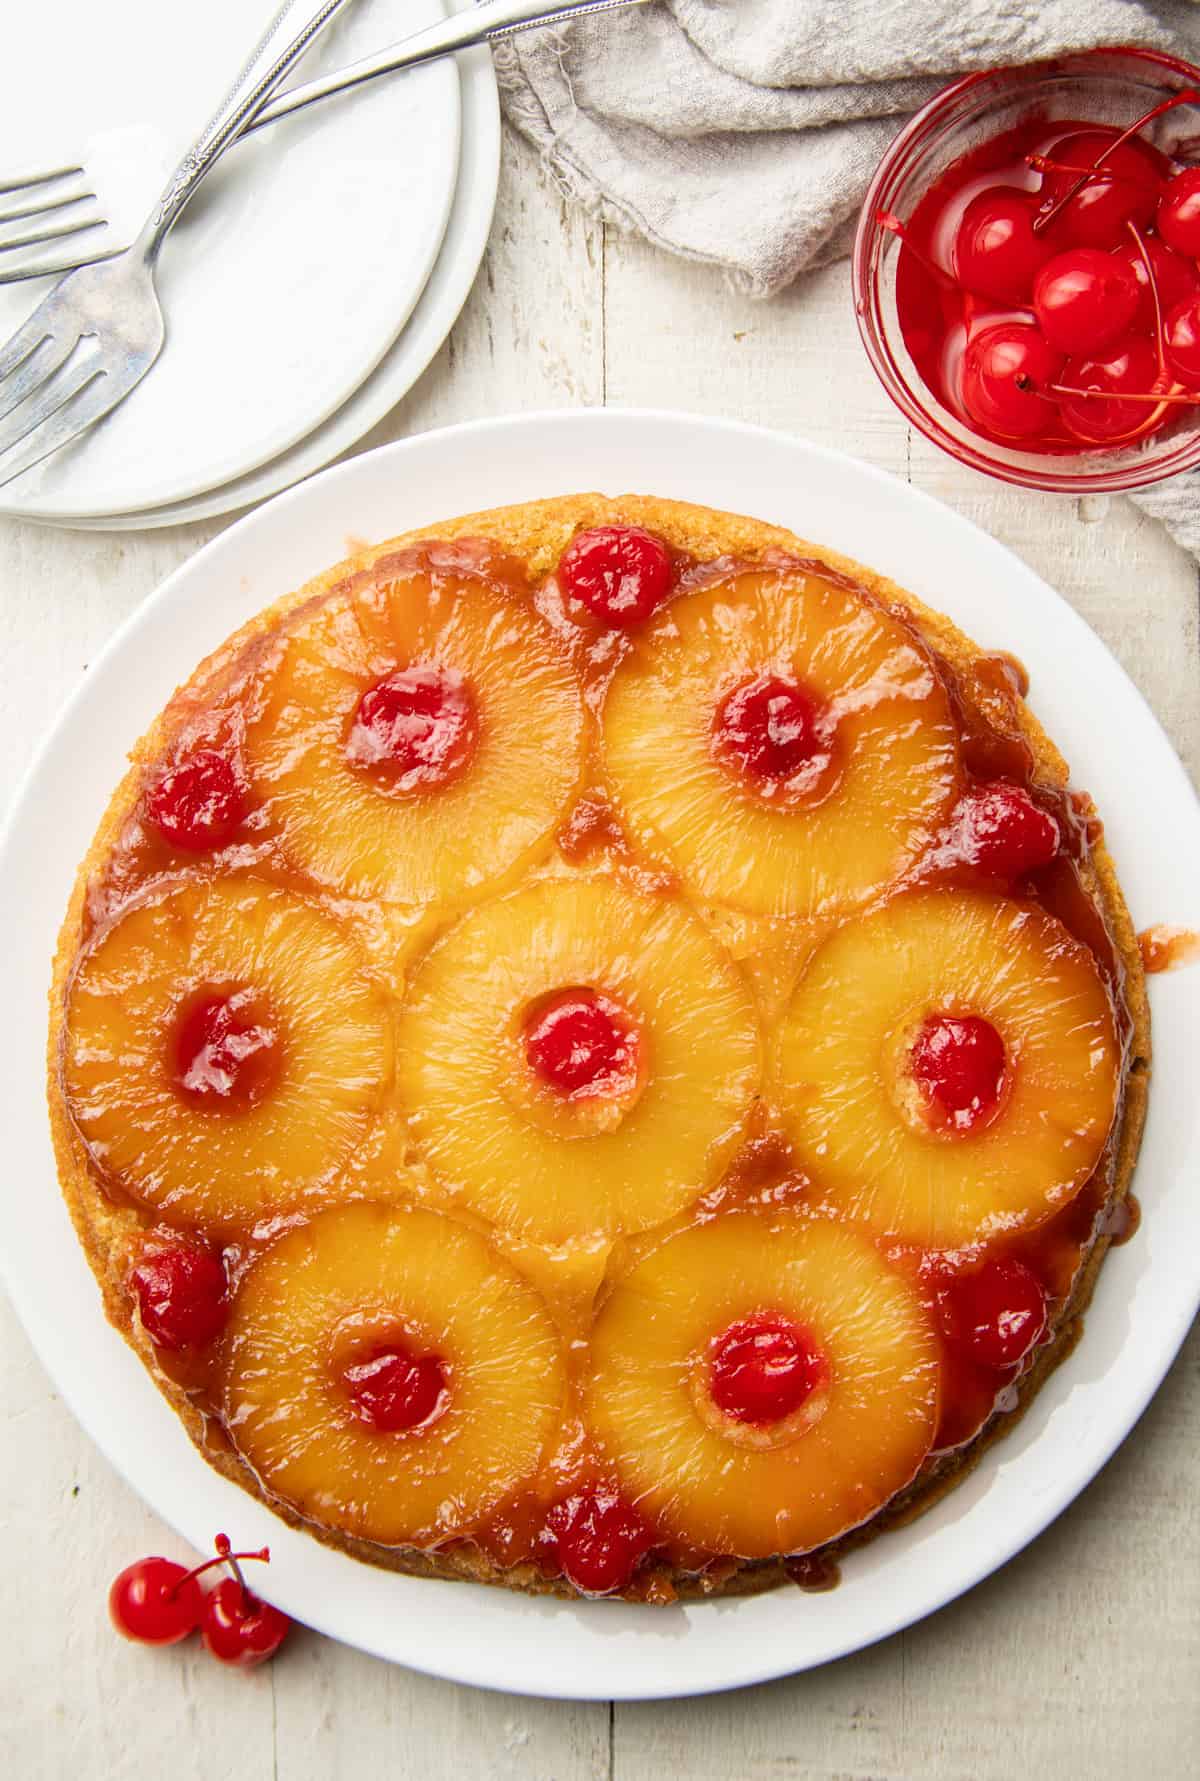 Whole Vegan Pineapple Upside Down Cake on a plate, bowl of cherries, and serving plates on a white surface.